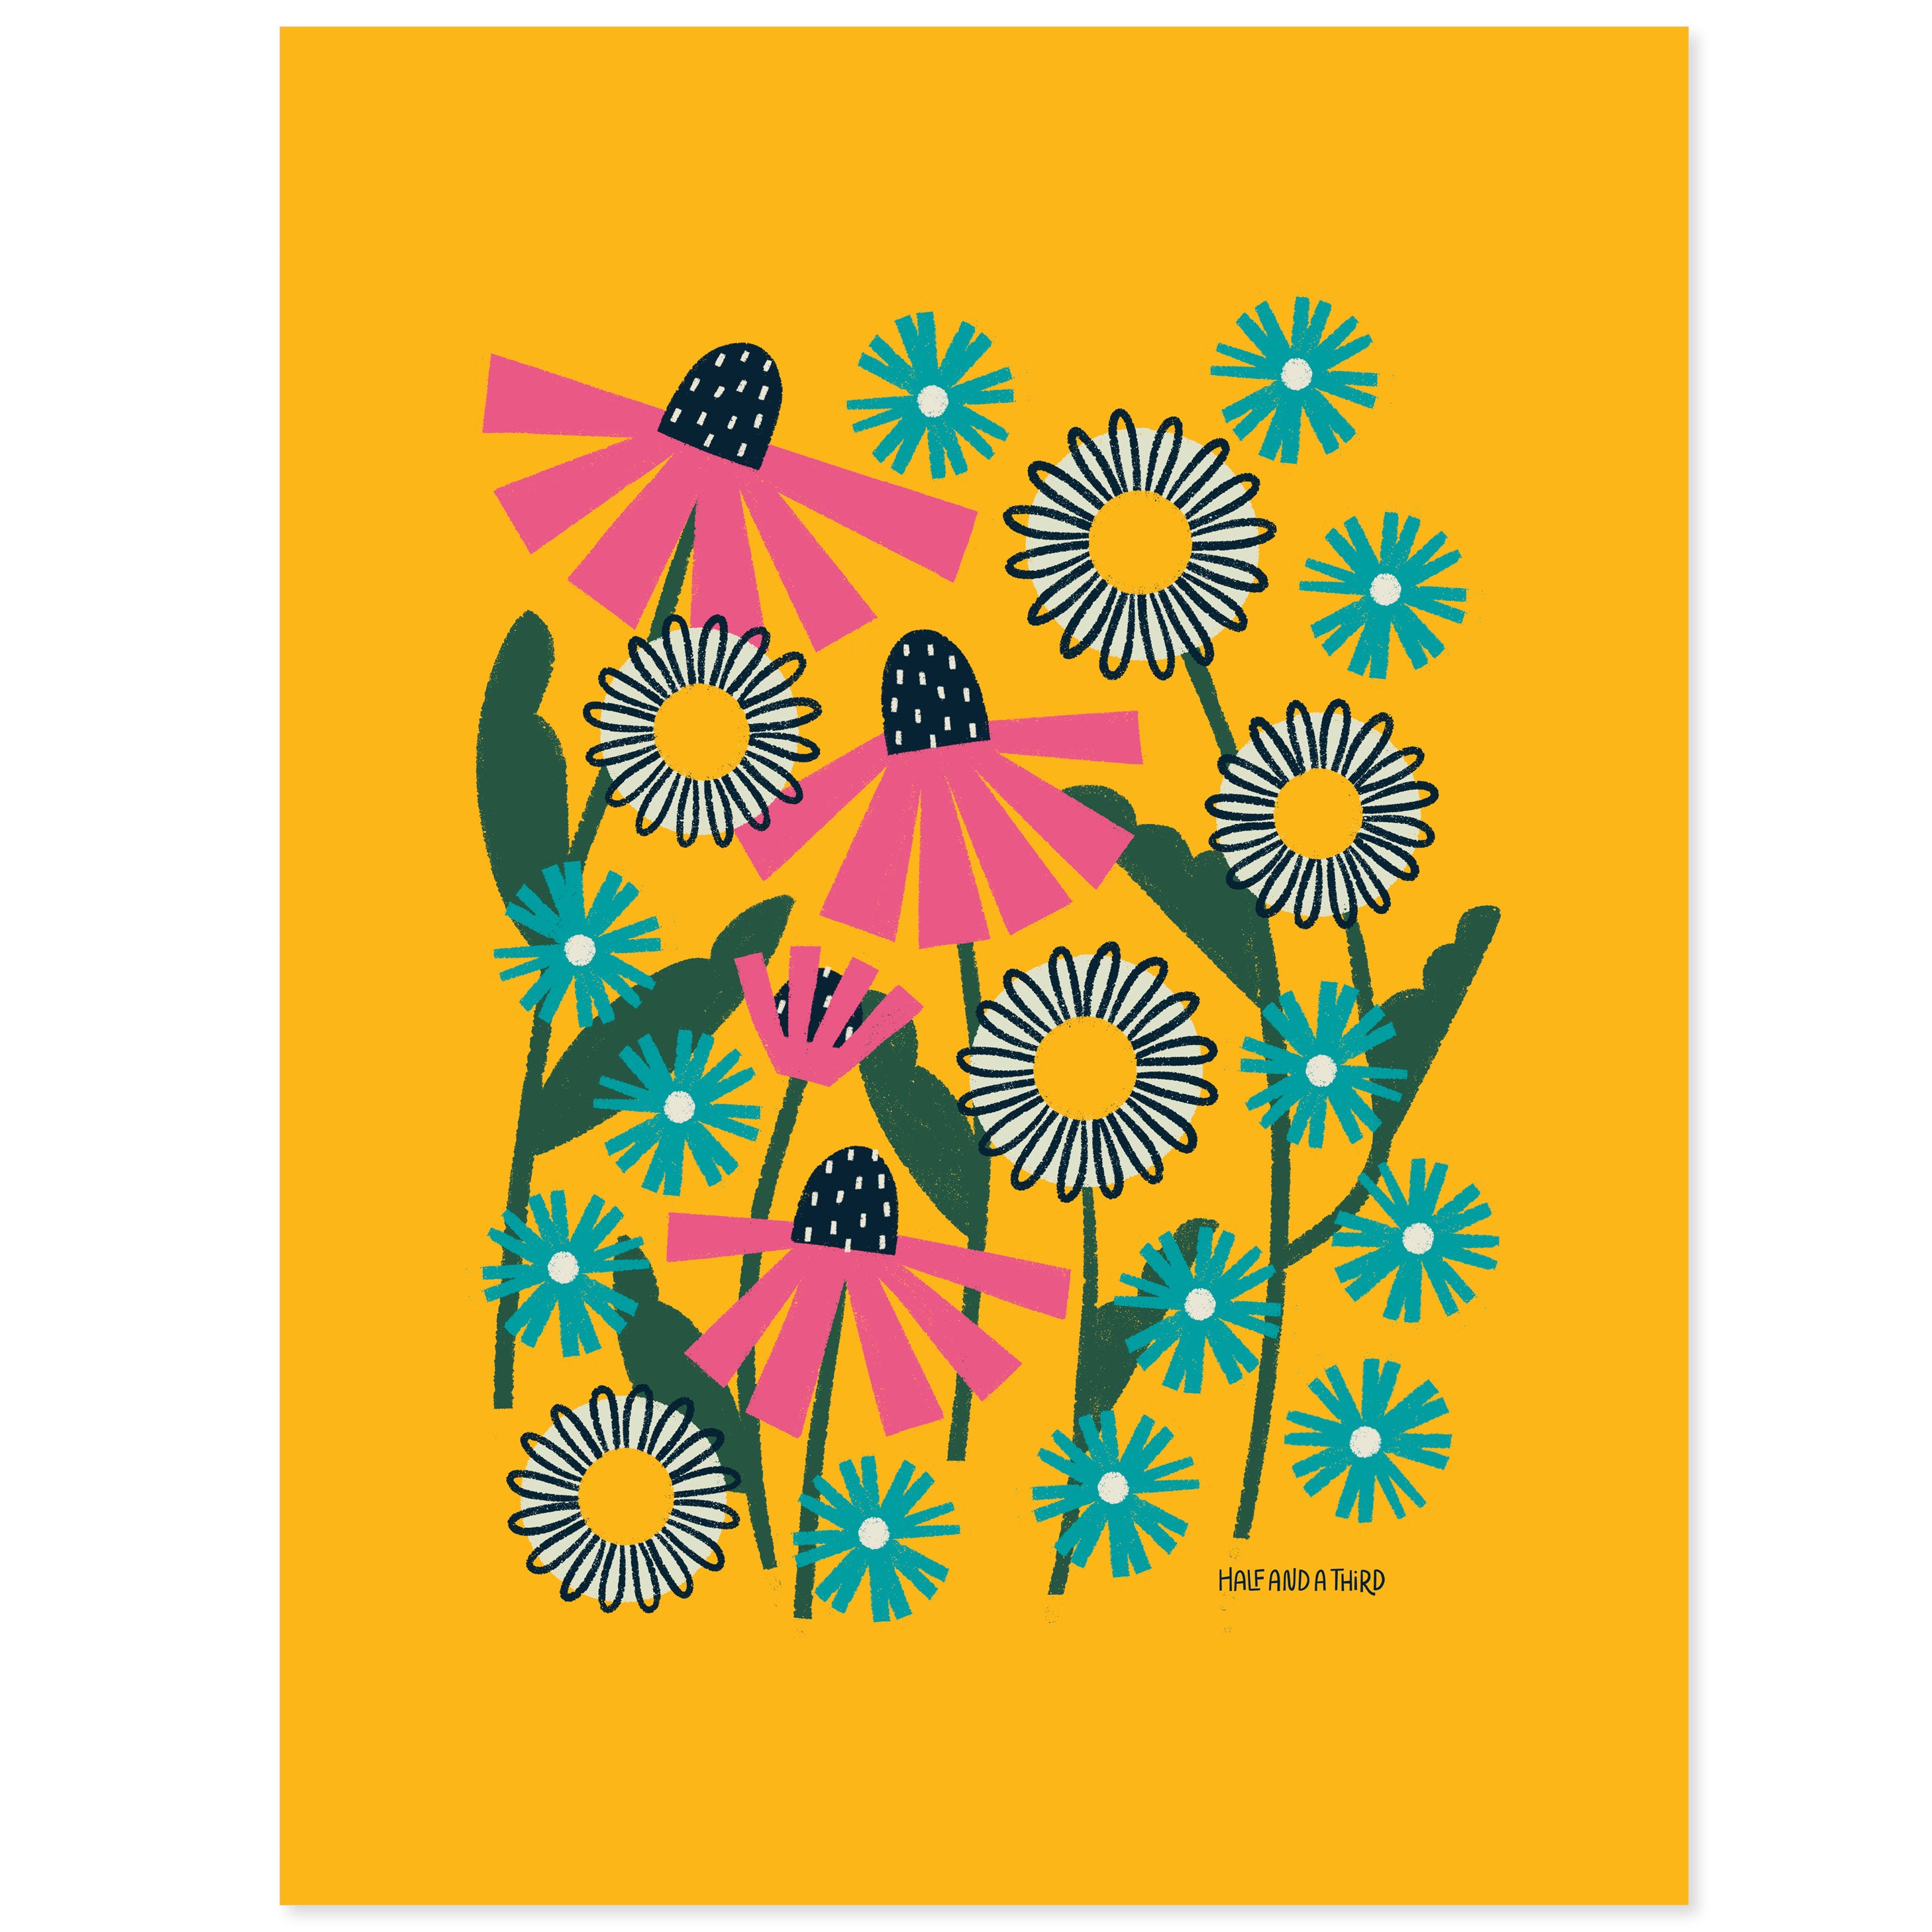 Coneflower, Daisy, Aster Yellow Print, Half and a Third, Katey Stafford